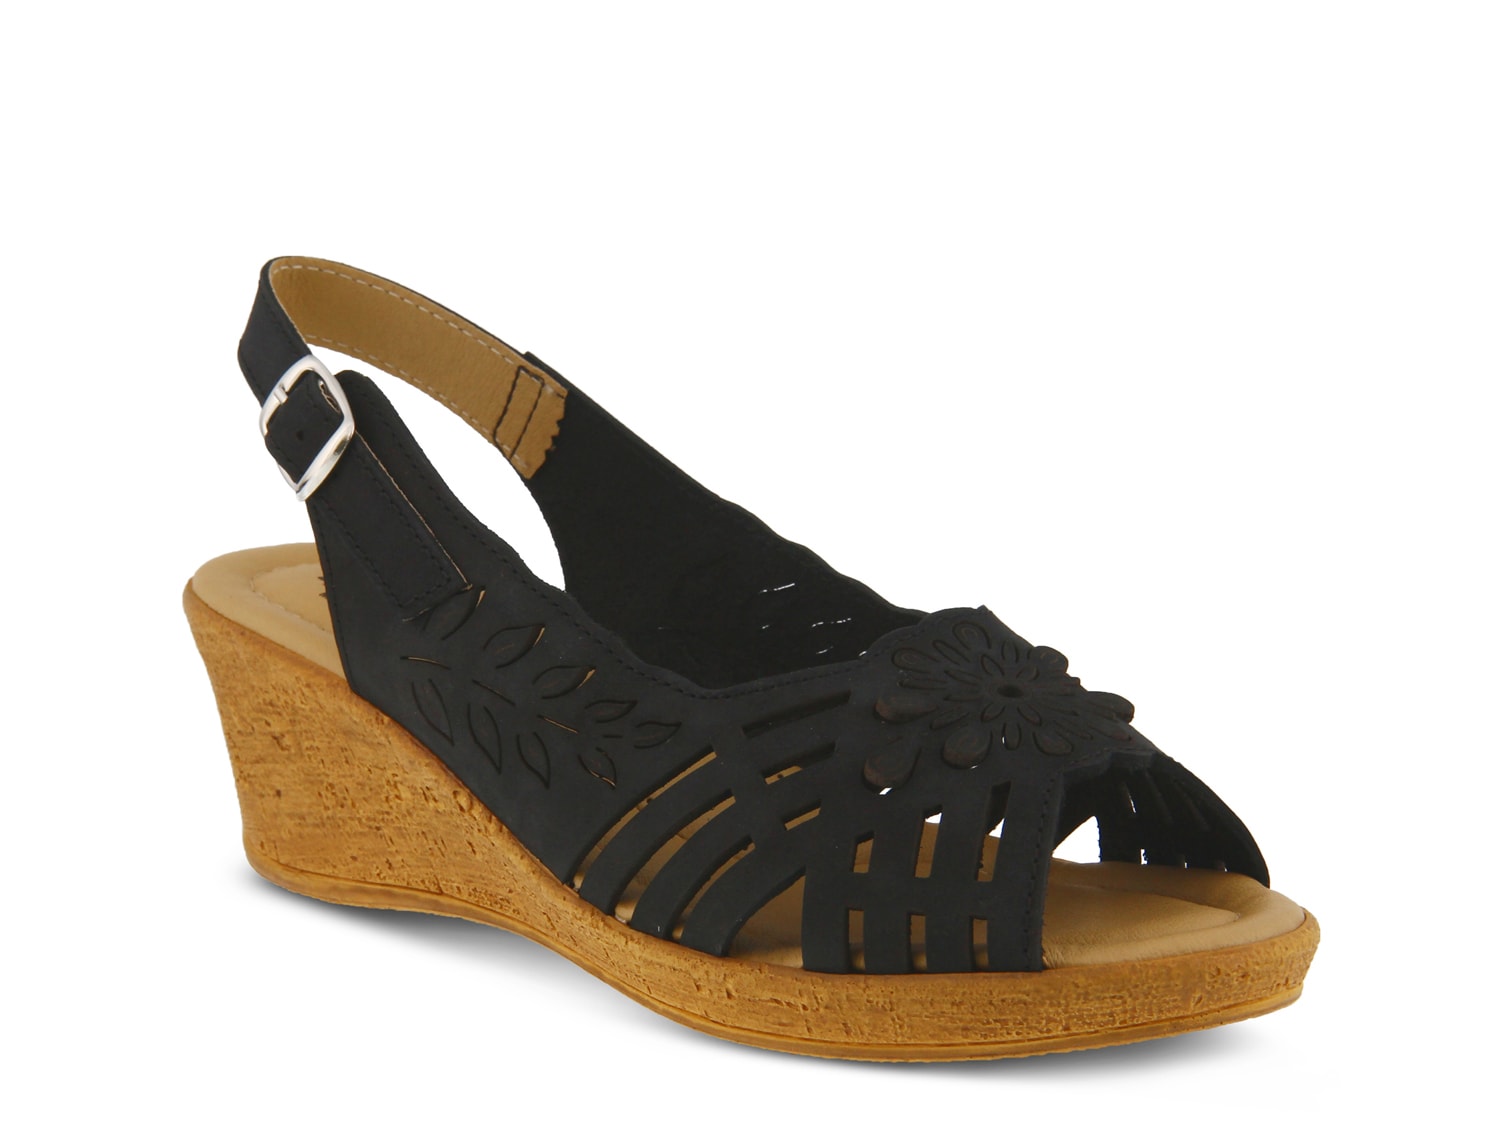 Spring Step Udoban Wedge Sandal - Free Shipping | DSW